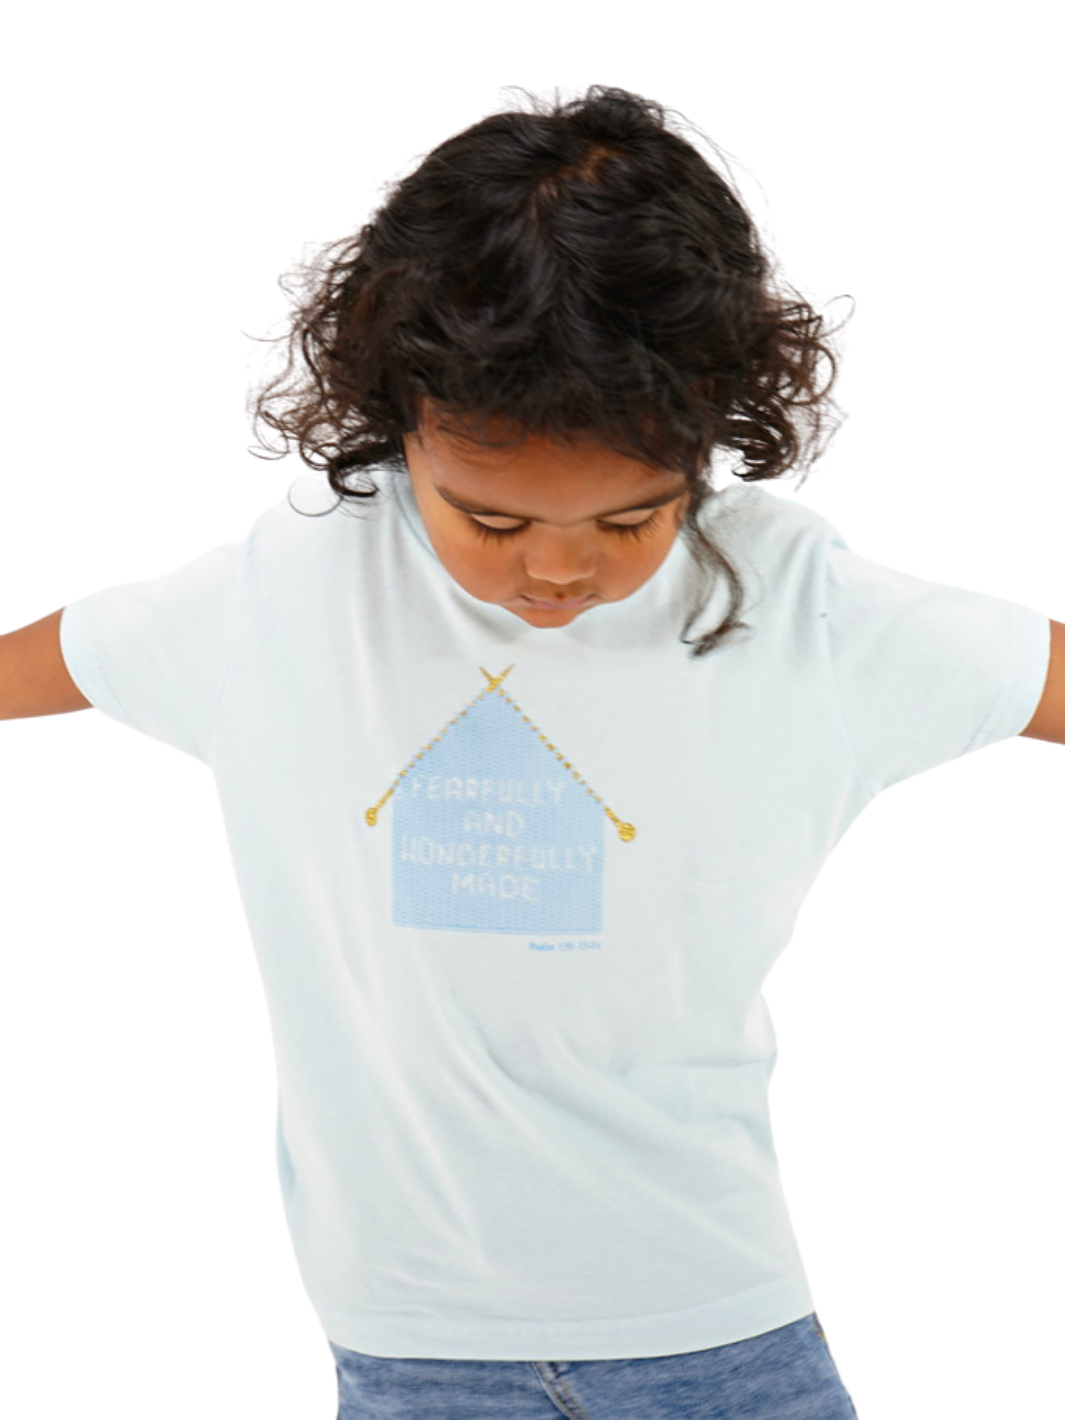 Blue Toddler T-Shirt with "Fearfully and Wonderfully Made" printed on front and woven GODinme logo tag sewn on bottom left 